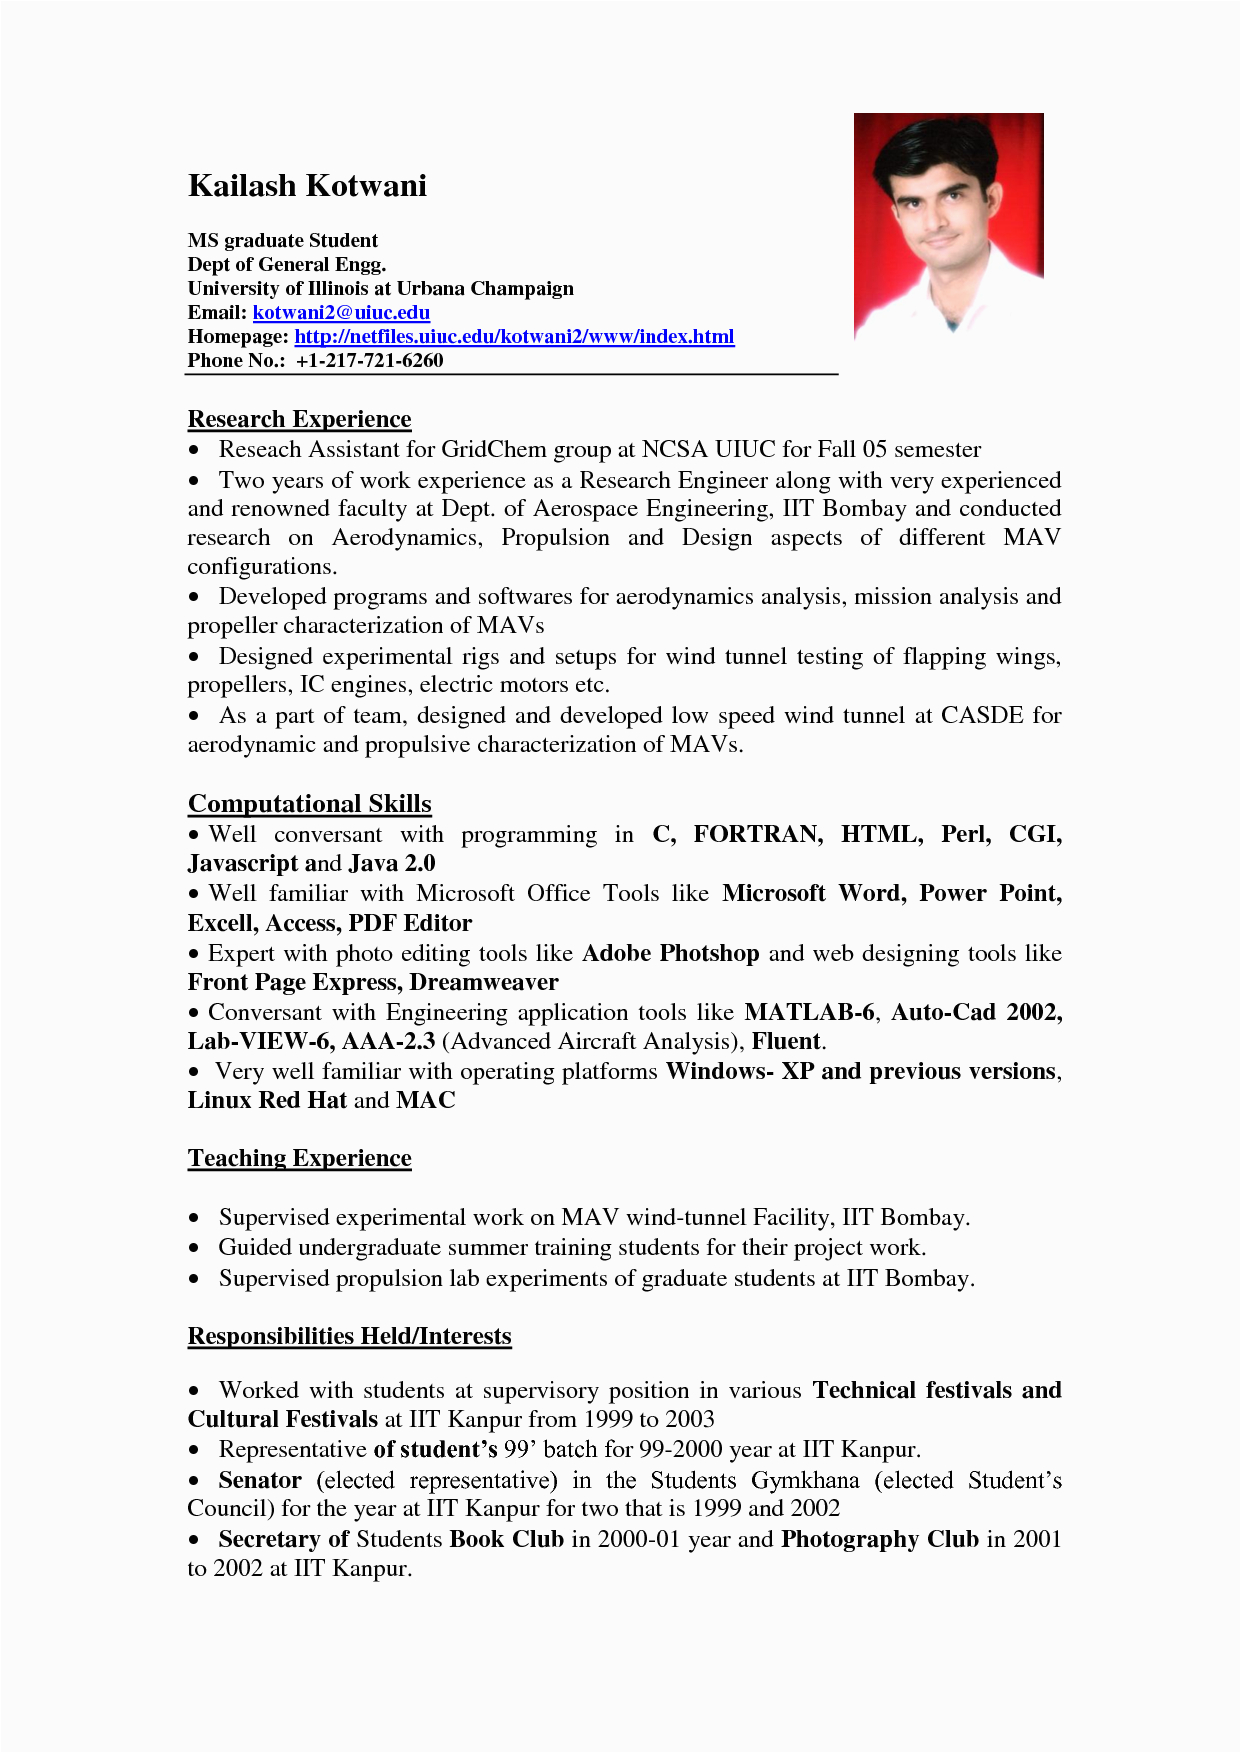 Sample Resume for It Students with No Experience Internship Cv Template for Students with No Experience No Experience